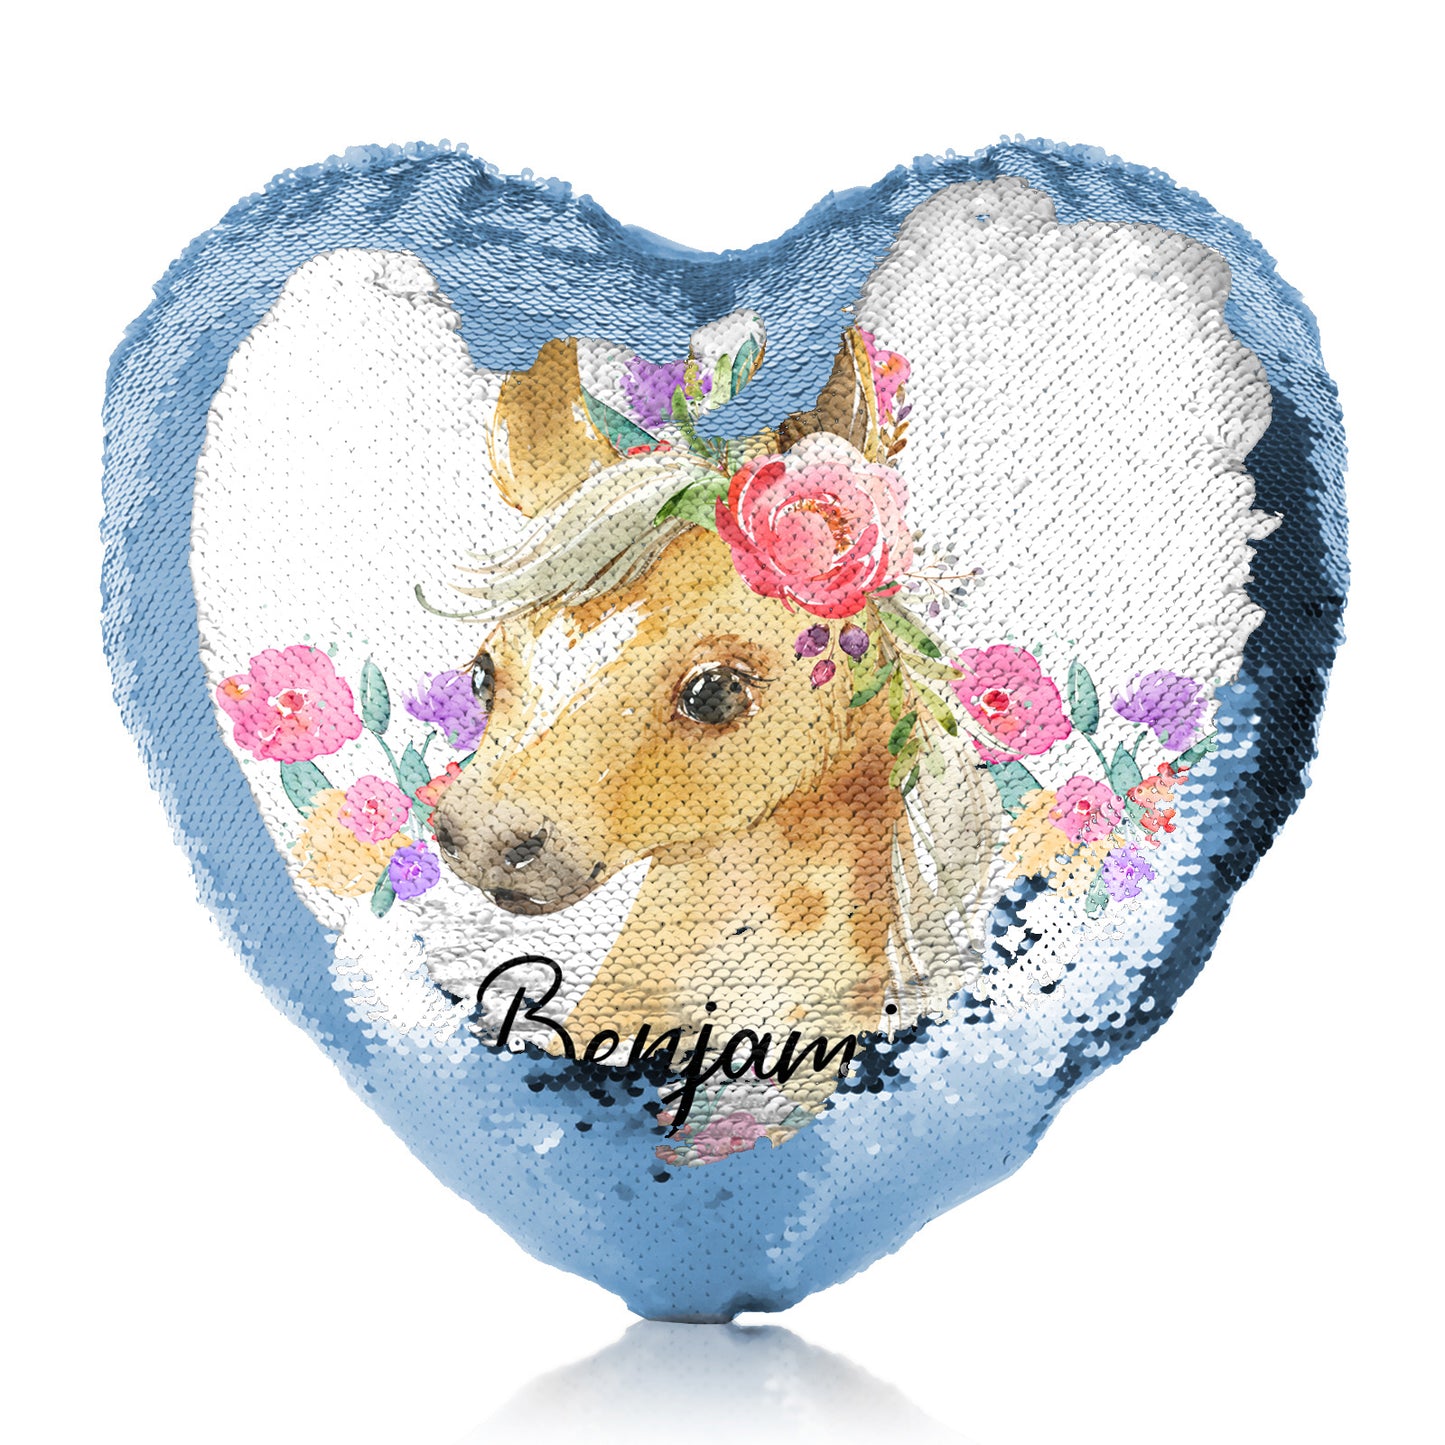 Personalised Sequin Heart Cushion with Palomino Horse Multicolour Flower Print and Cute Text